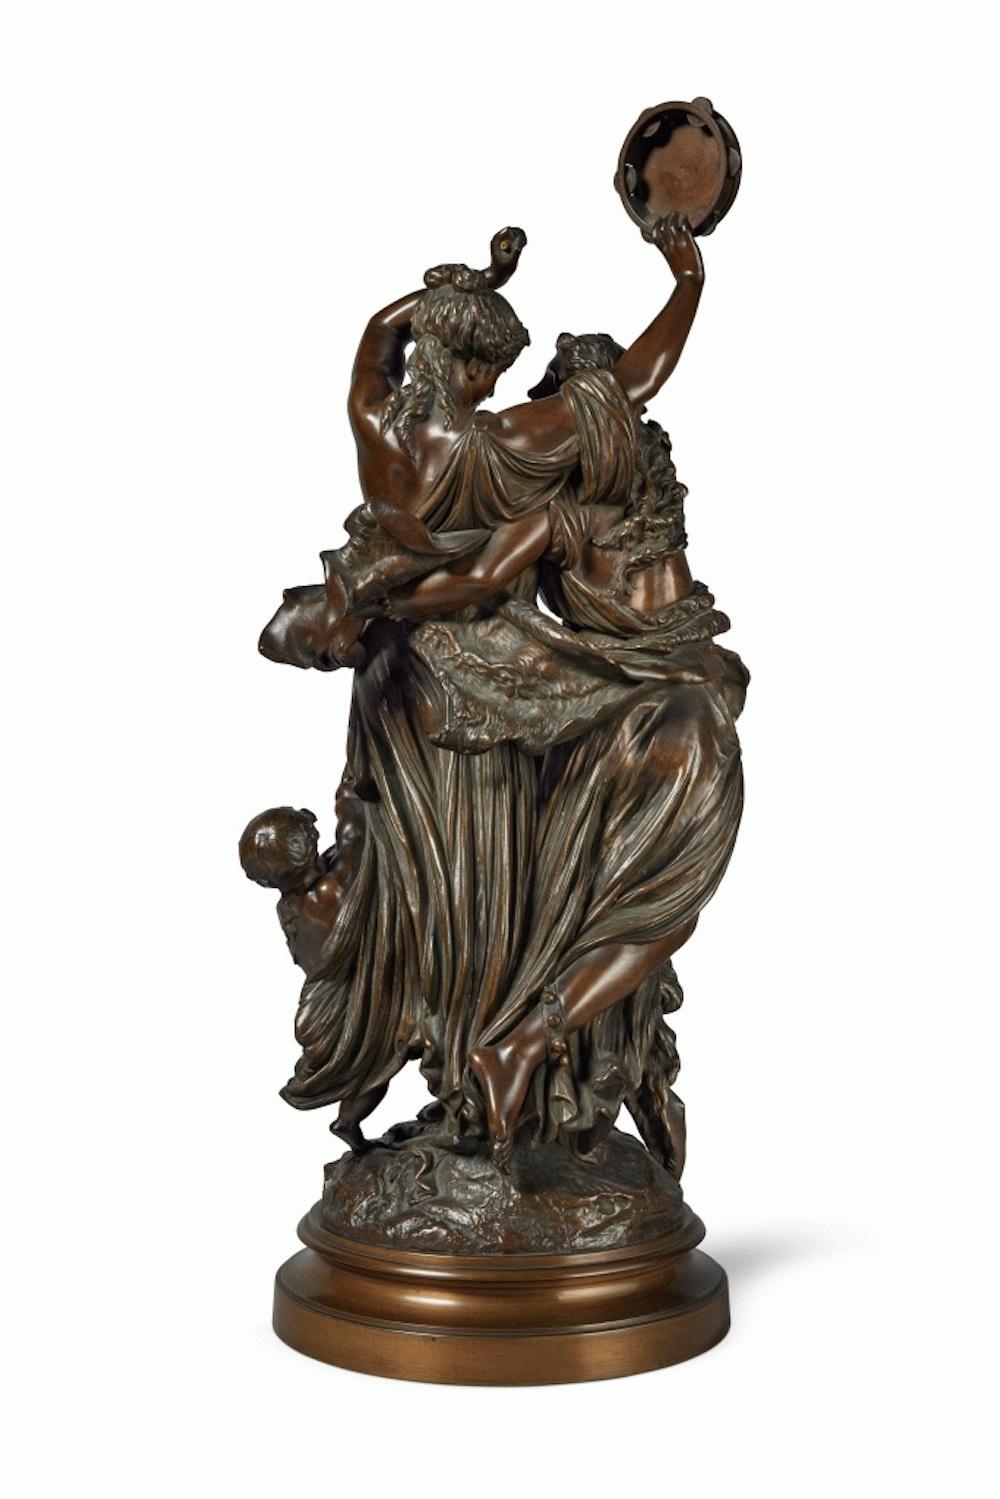 Albert-Ernest Carrier-Belleuse 
1824 - 1887
Danse au Tambourin
signed Carrier Belleuse bronze
height: 72.4cm. diameter: 26.7cm.
Provenance
Important American collection.
The present composition is one of Carrier-Belleuse's most successful and